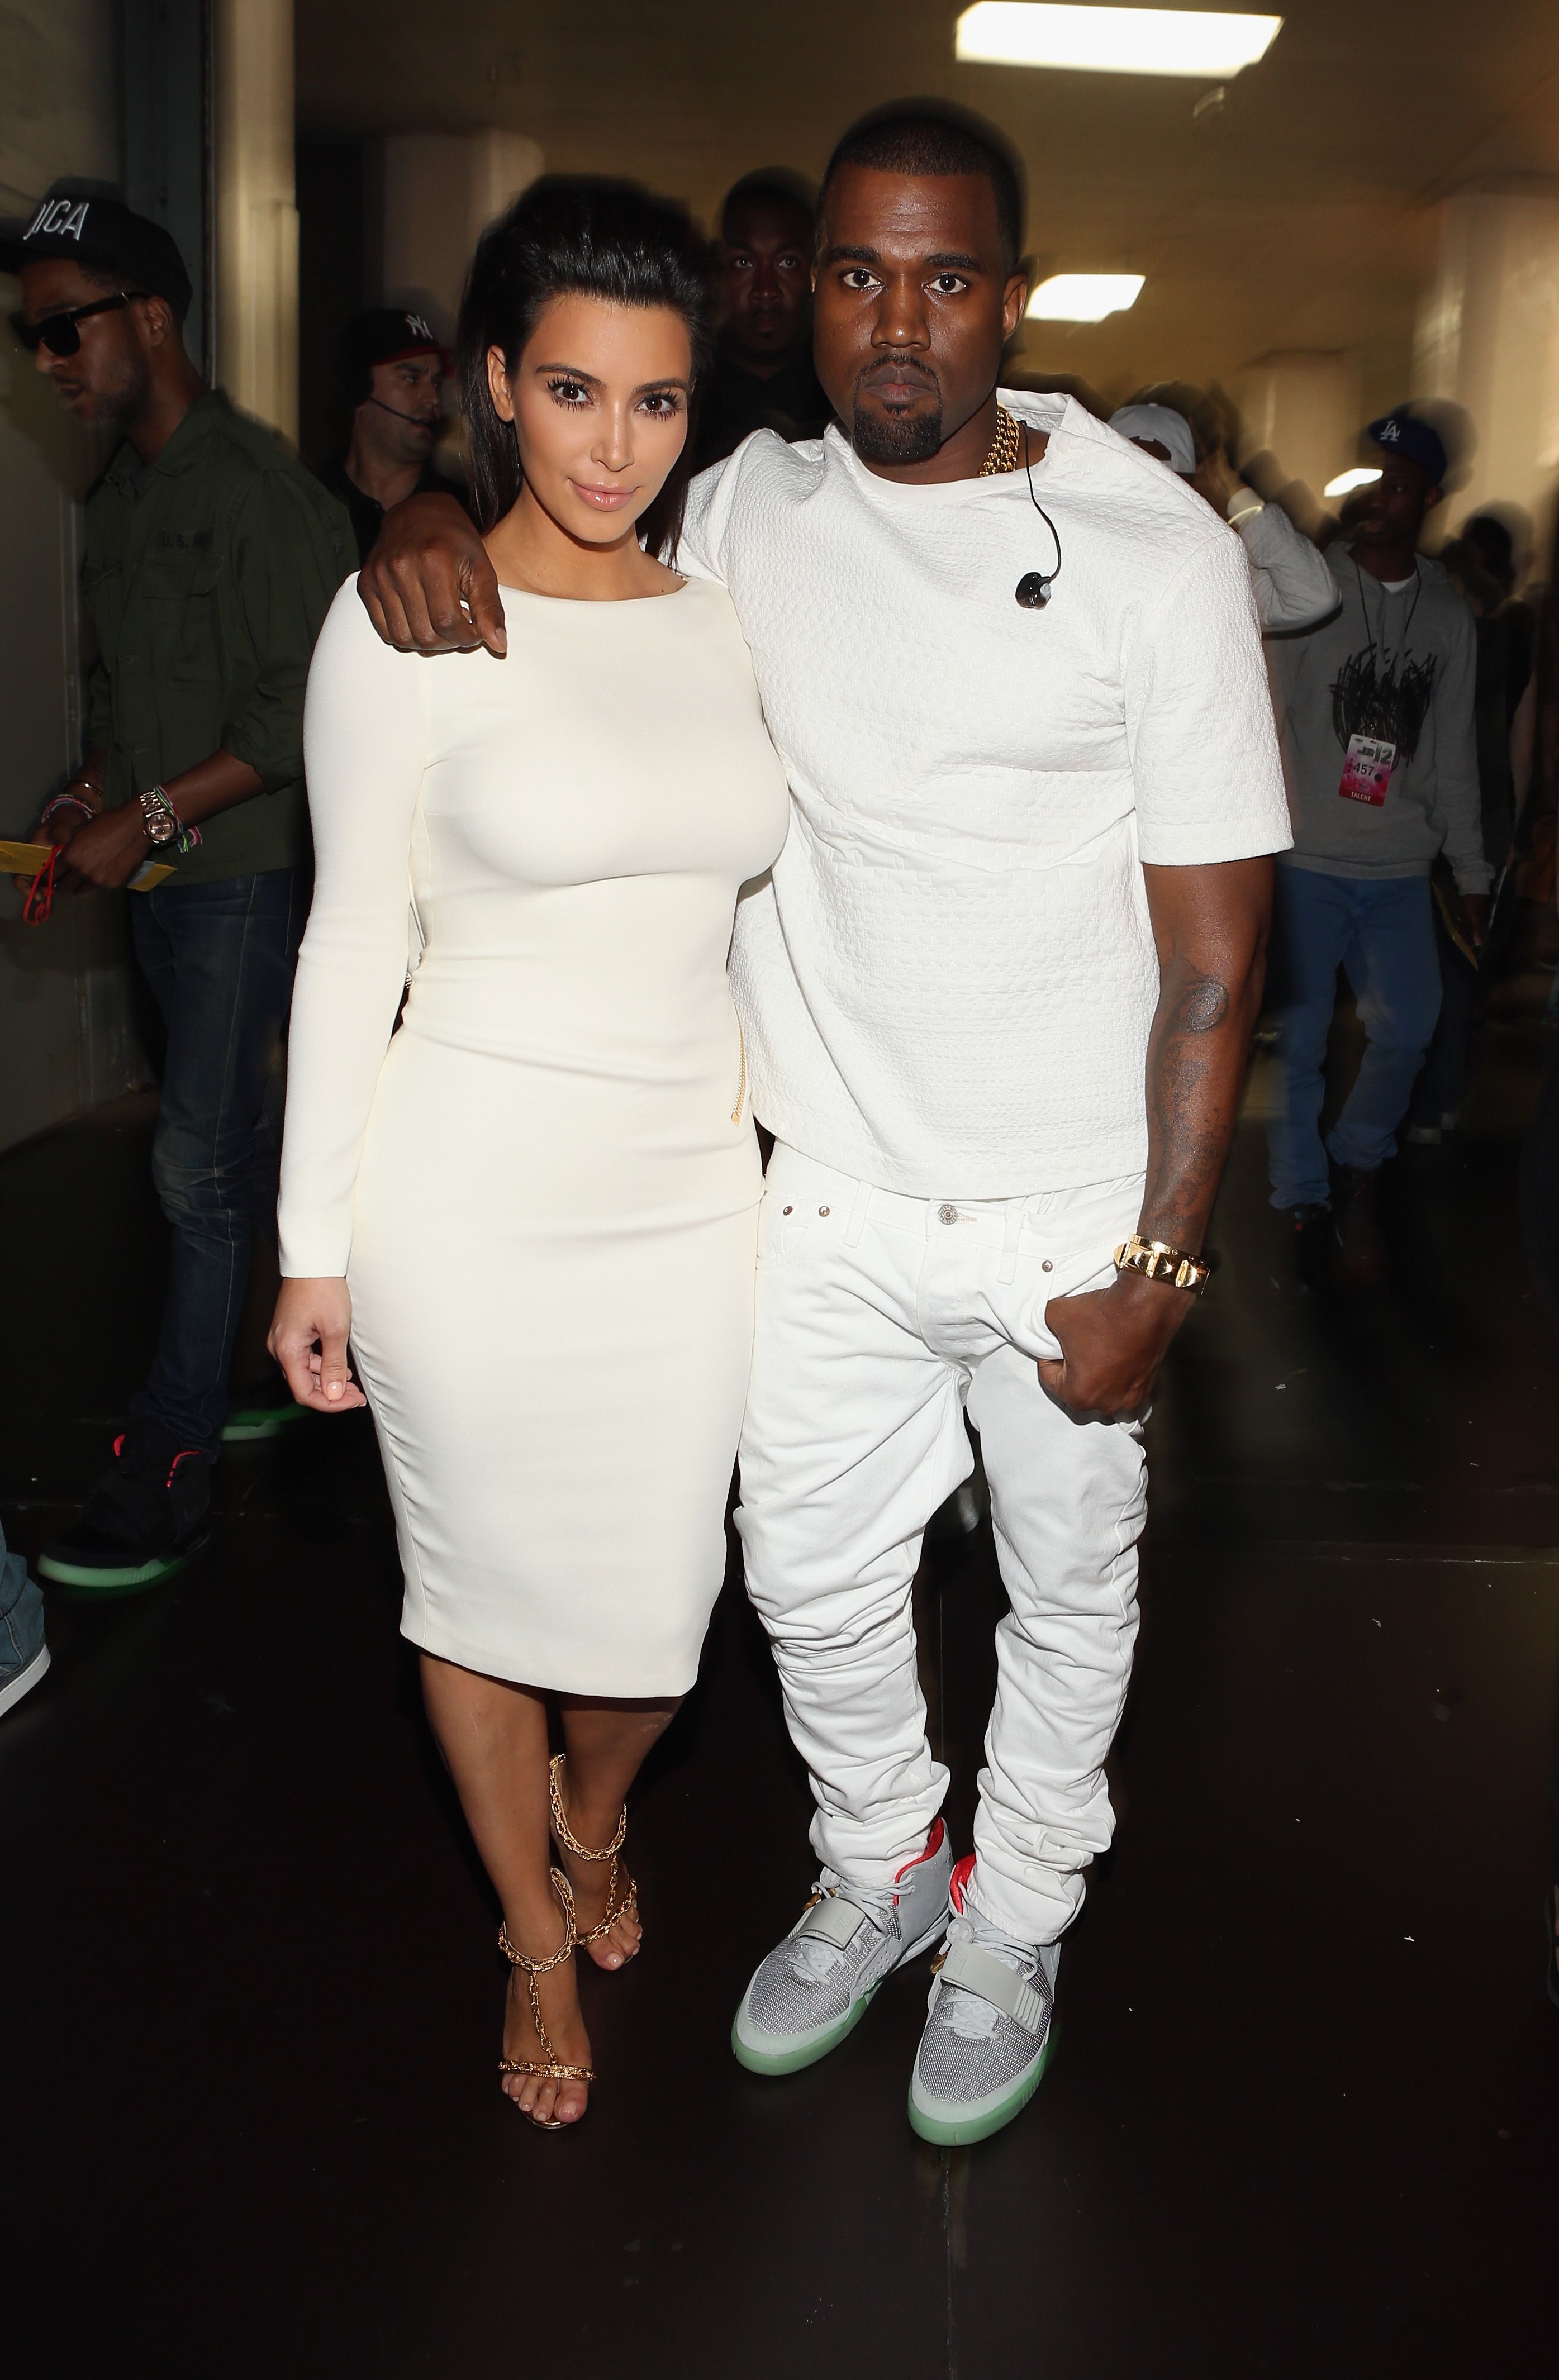 Kim Kardashian and Kanye West at the BET Awards held at The Shrine Auditorium on July 1, 2012 | Photo: Getty Images